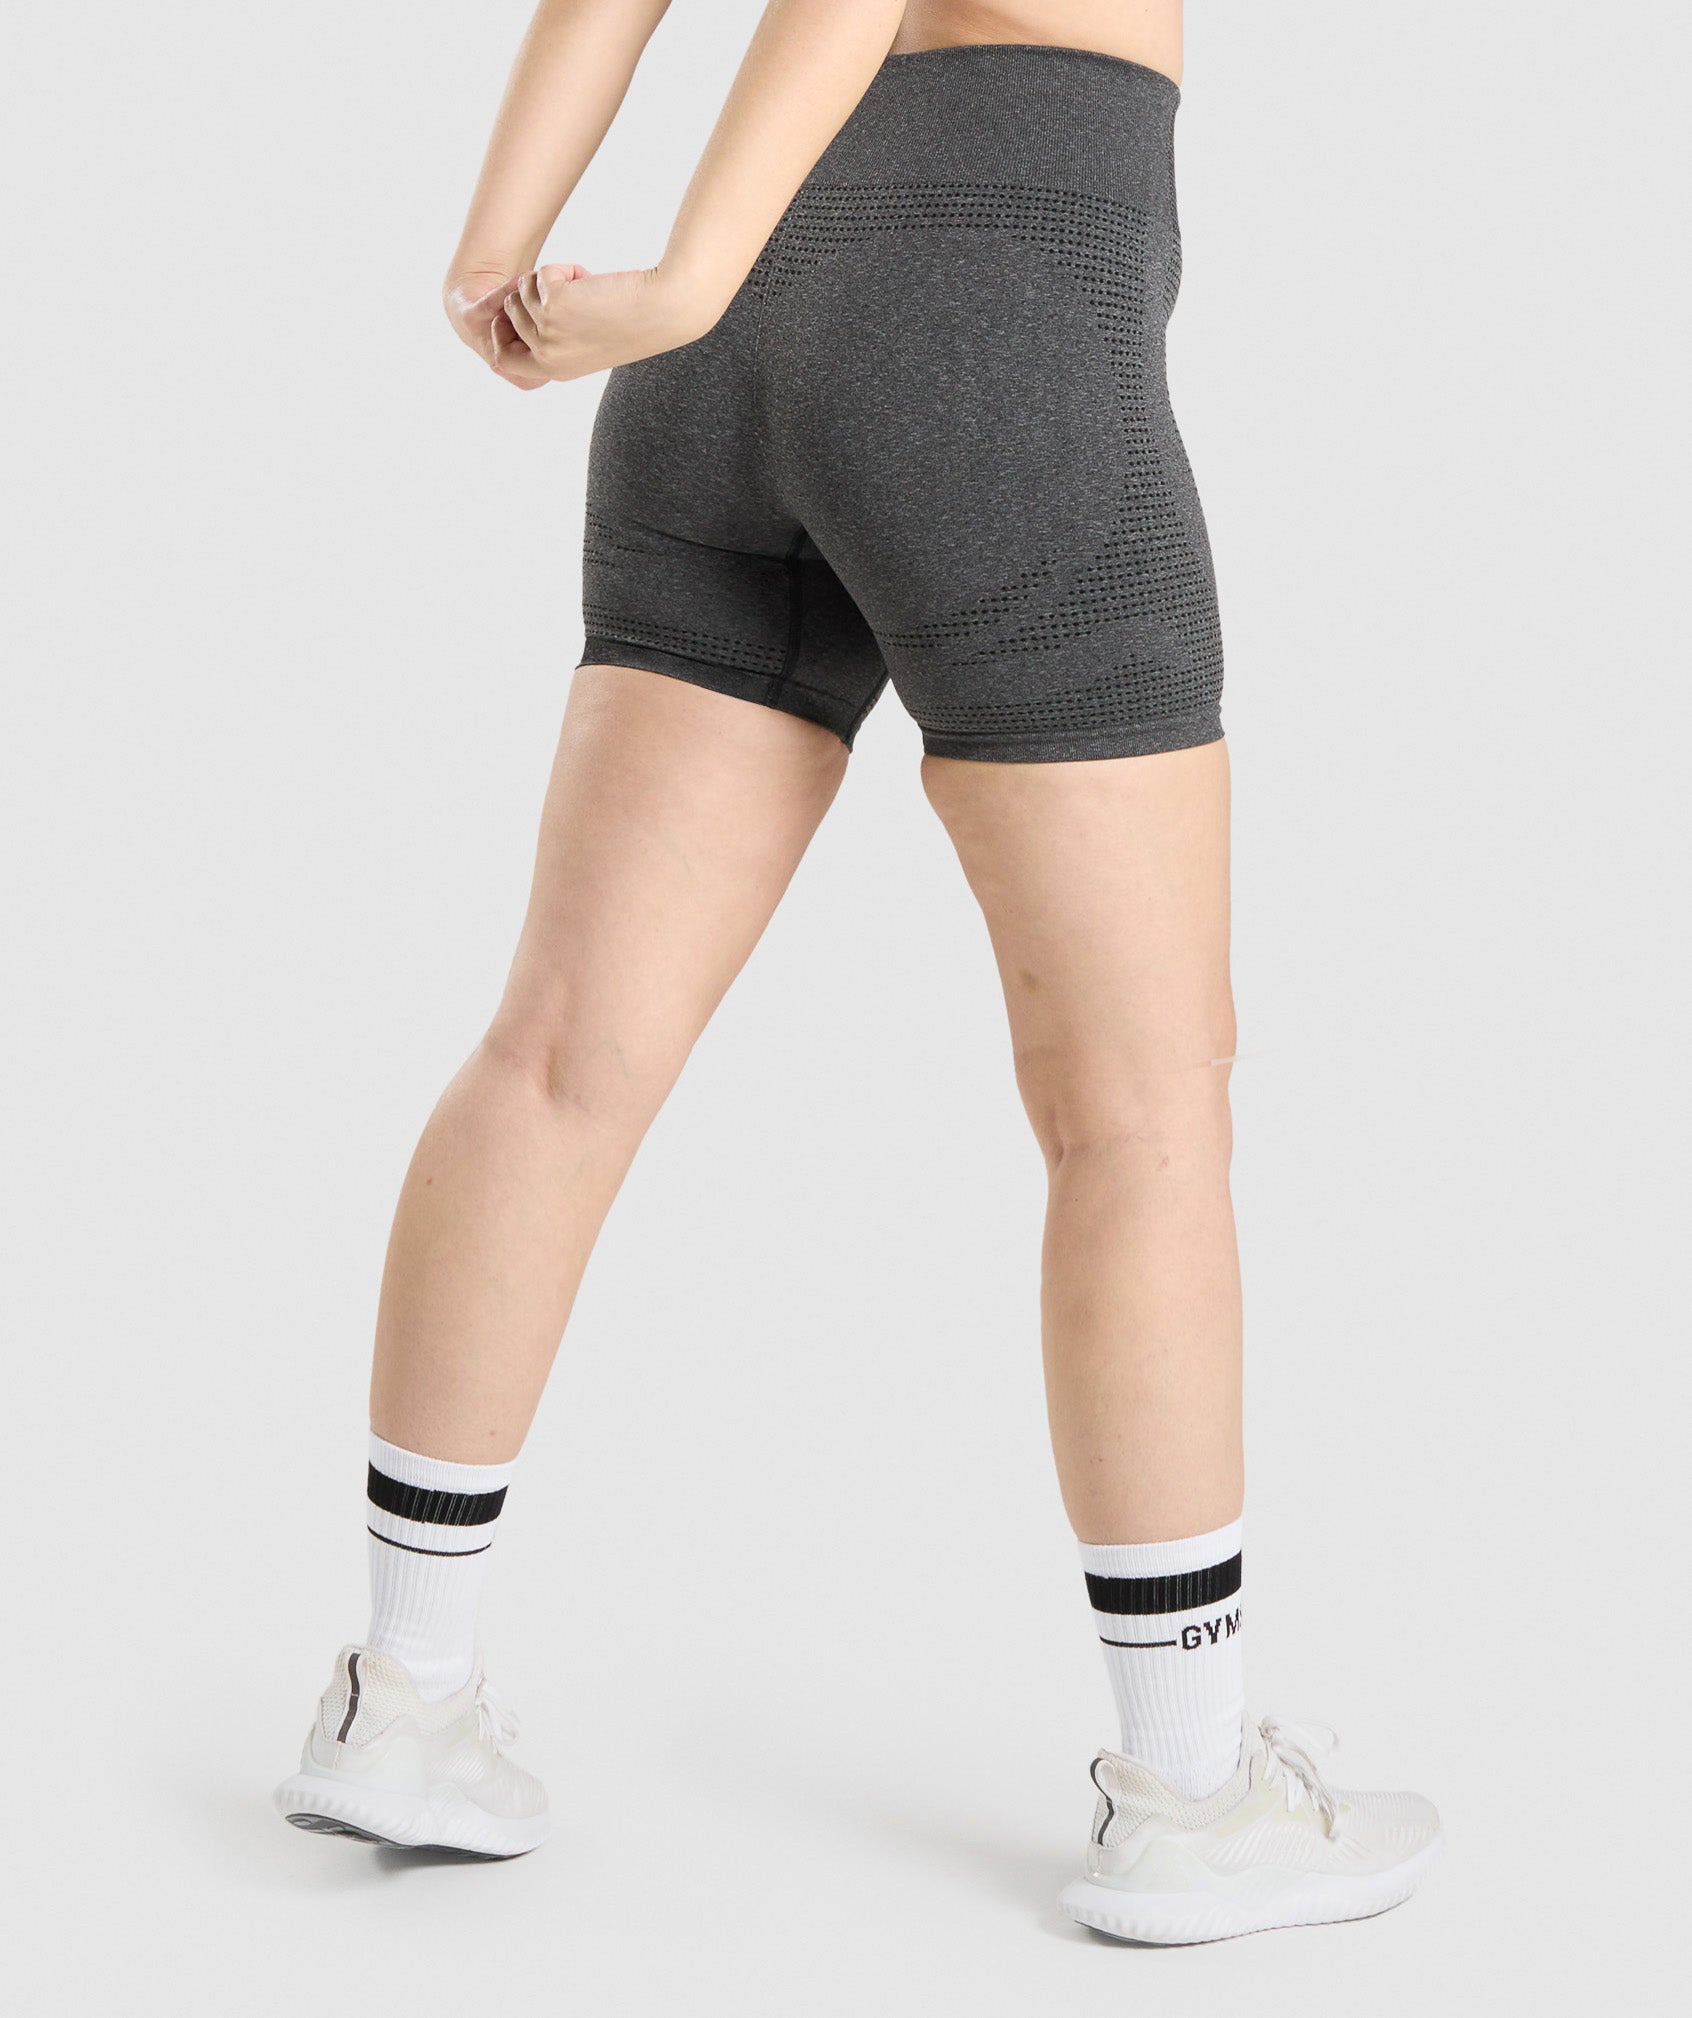 Vital Seamless 2.0 Shorts in Charcoal Marl - view 4